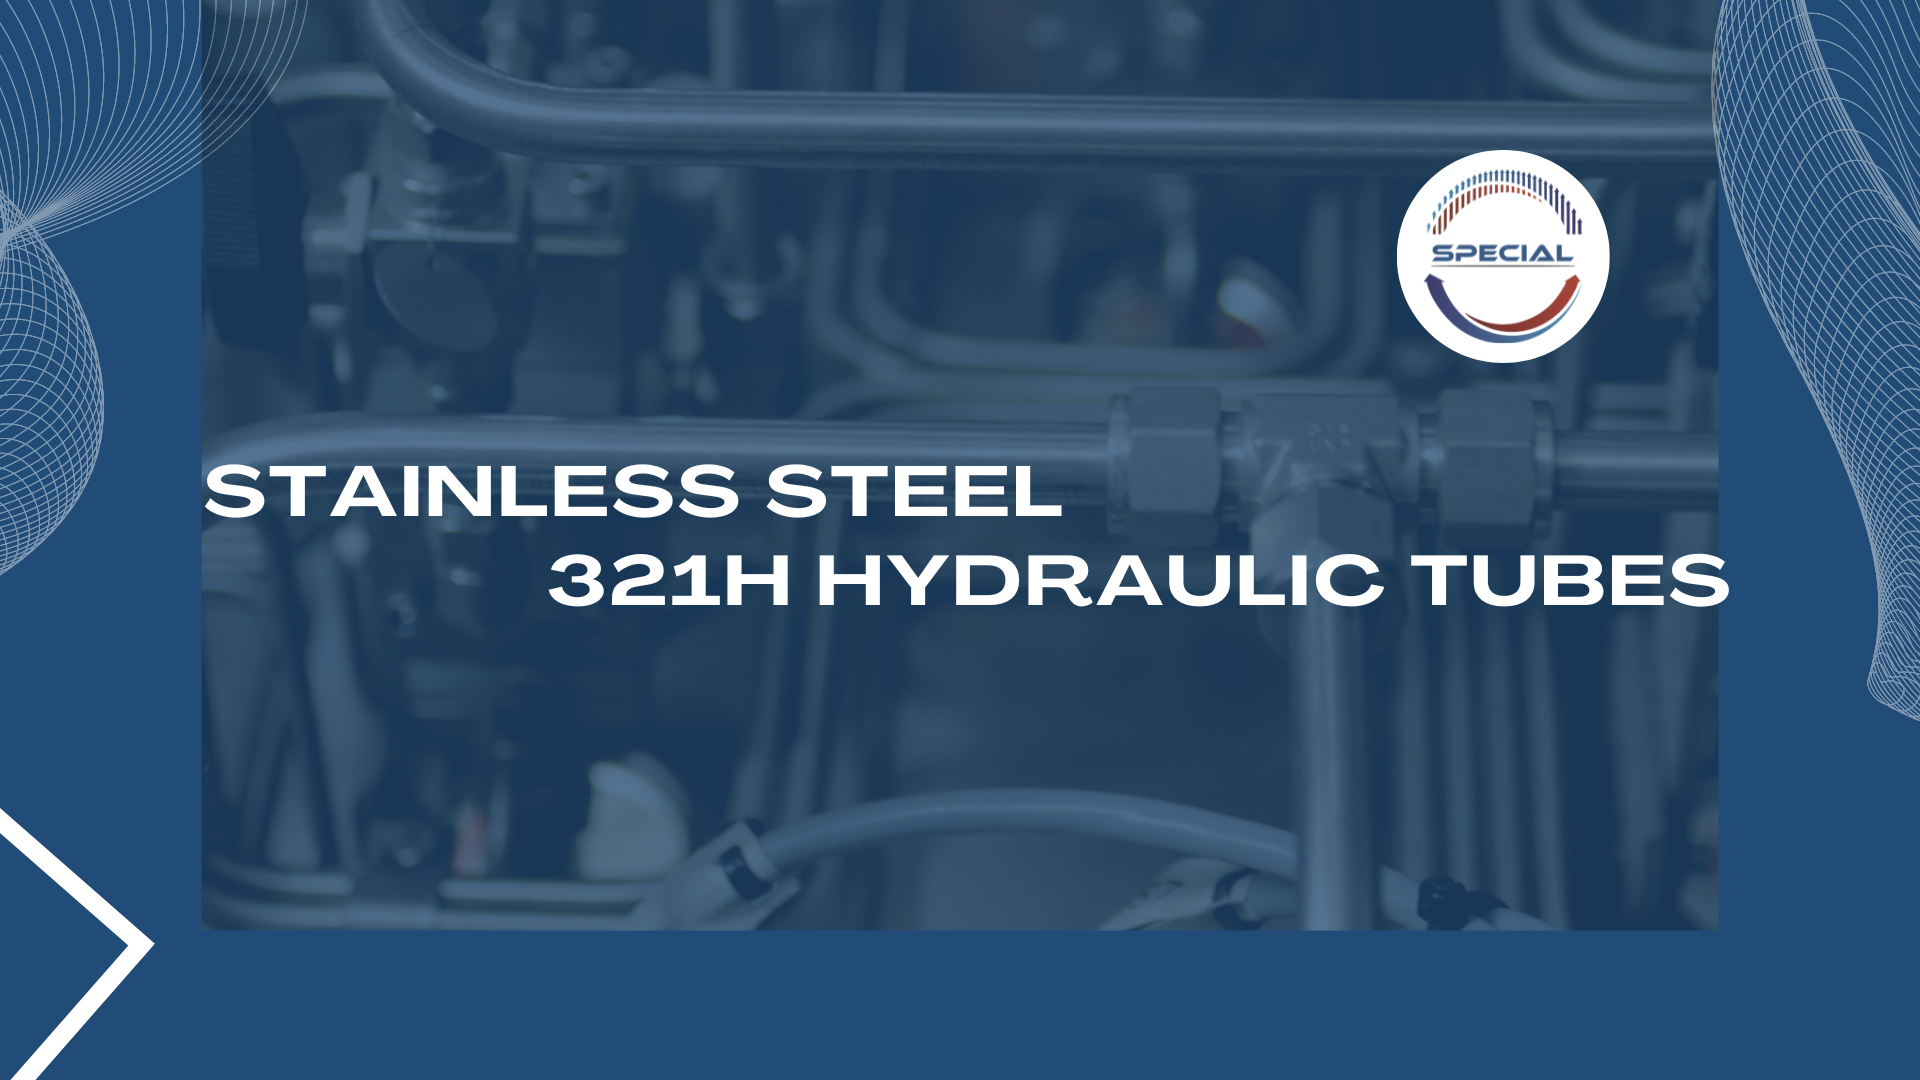 Stainless Steel 321H Hydraulic Tubes